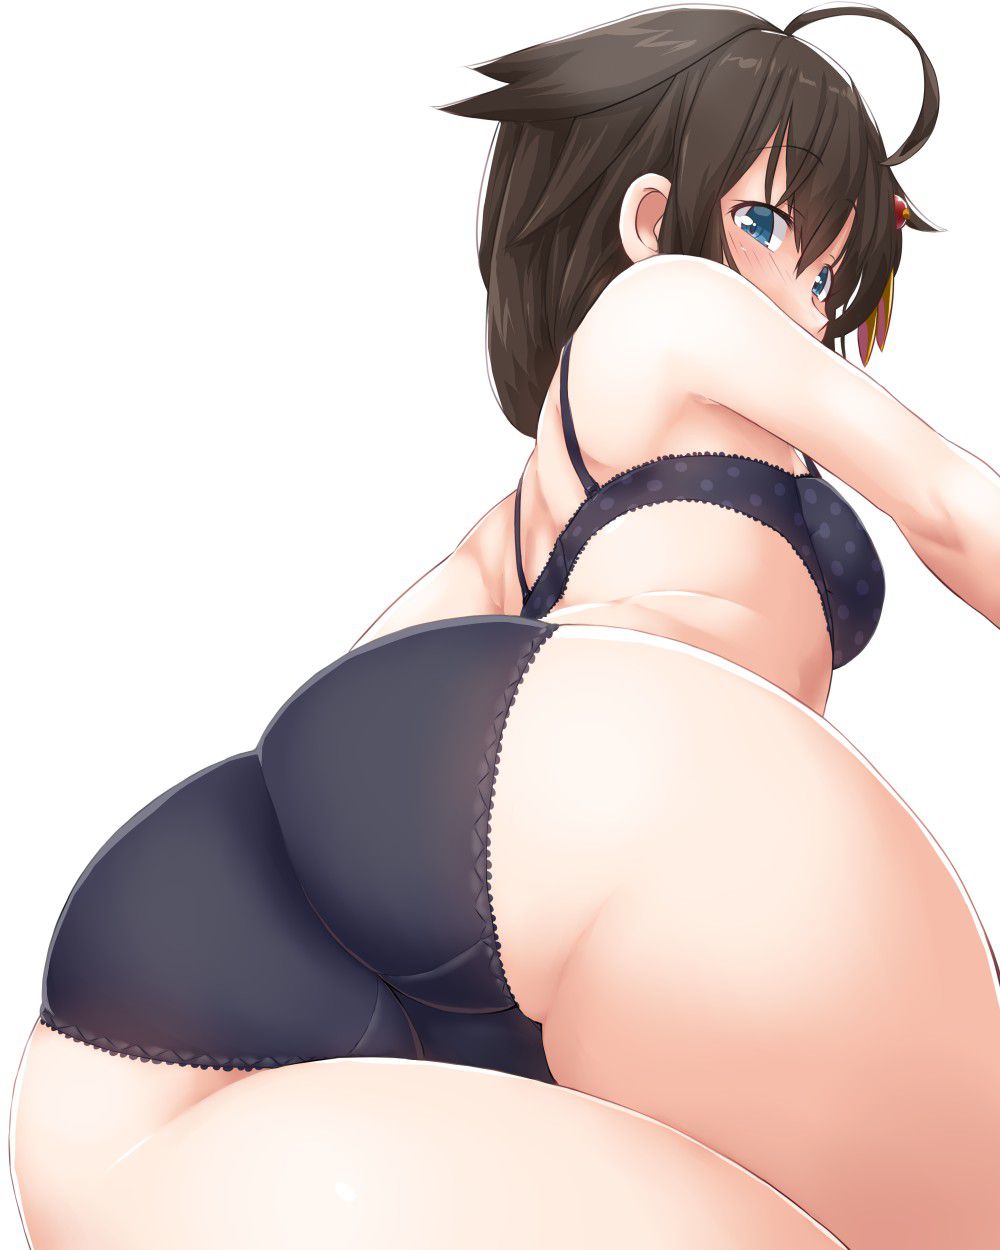 Secondary erotic image of a girl wearing black underwear that looks sexier than [secondary] that 20 [black underwear] 28